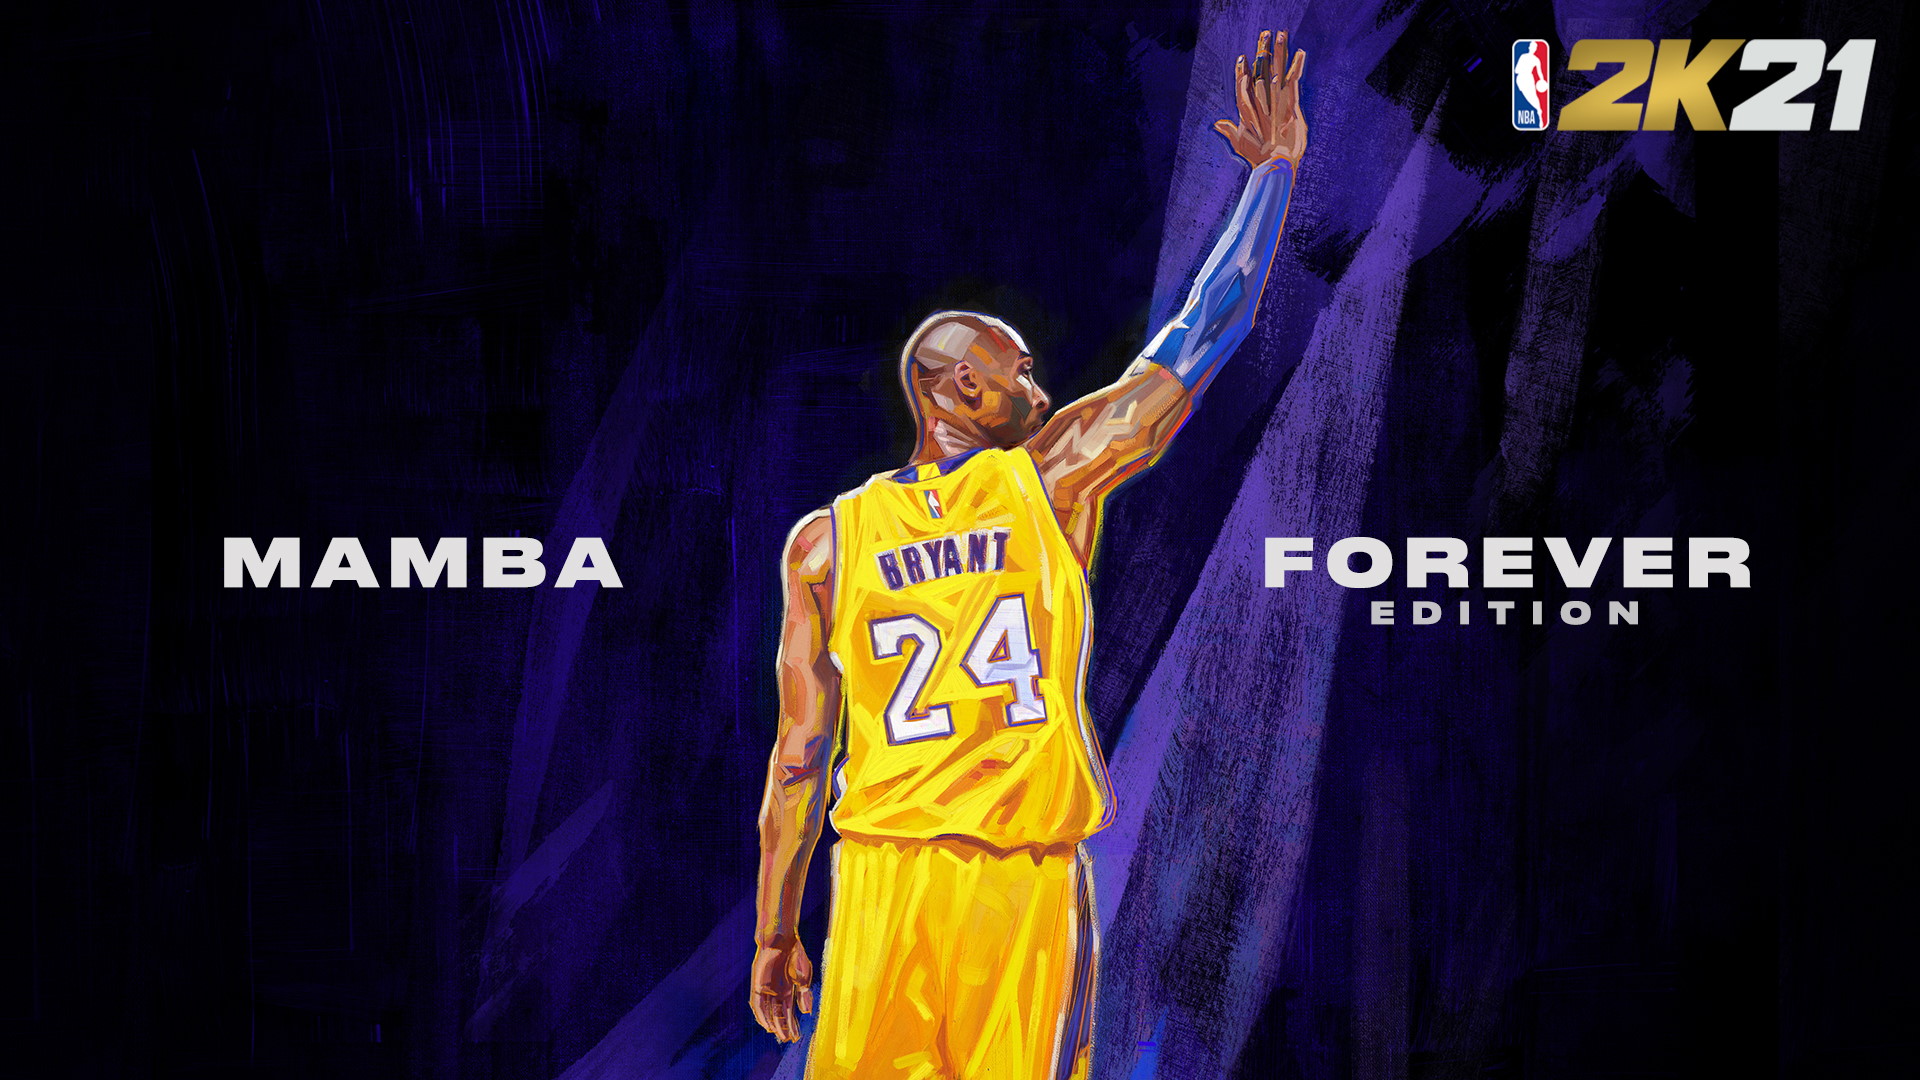 Nba 2k21 Cross Gen Upgrade Included With Mamba Forever Editions